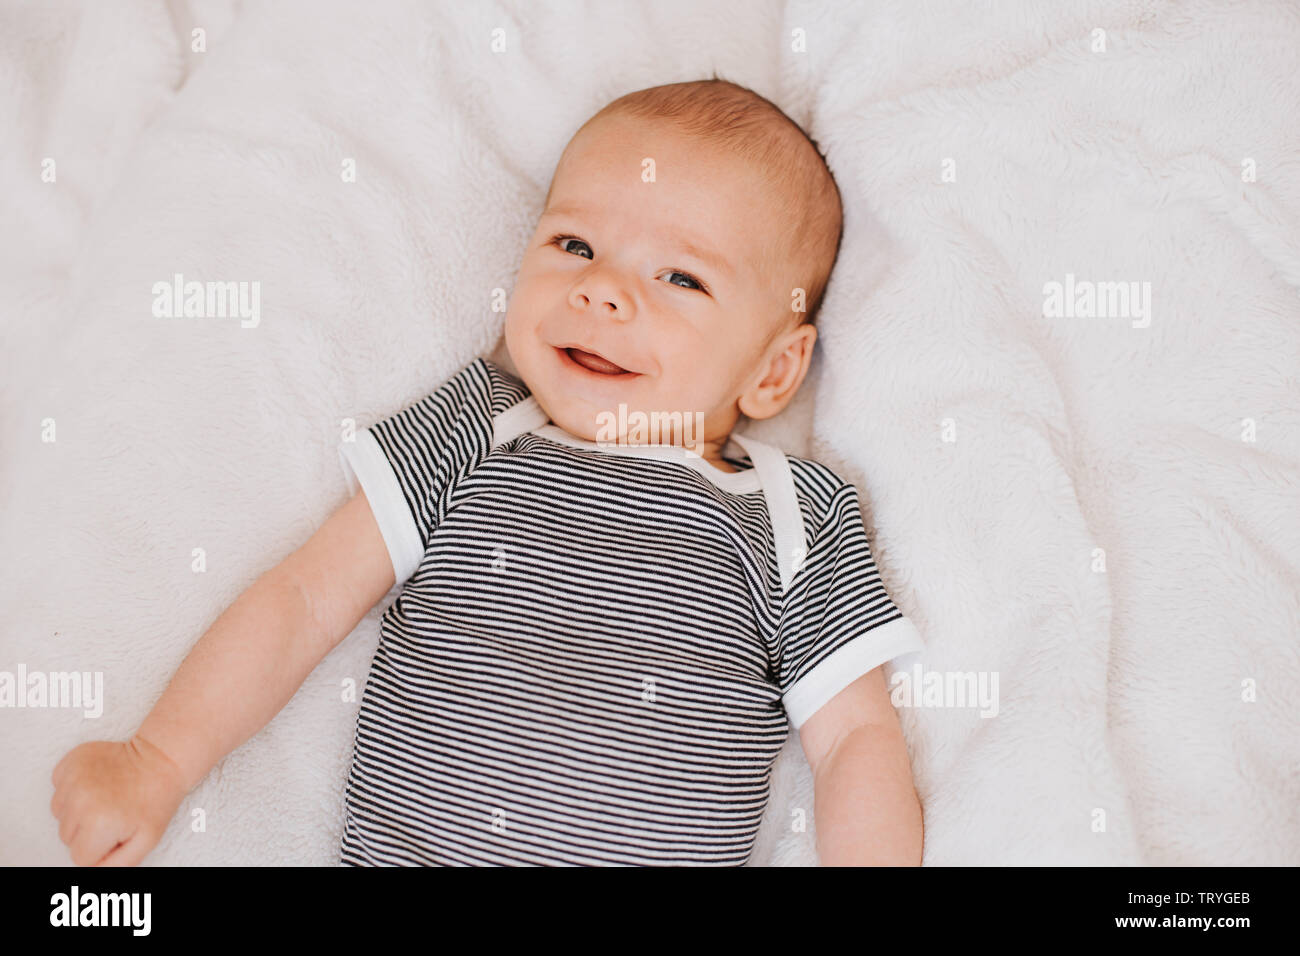 high angle view of smiling toddler Stock Photo